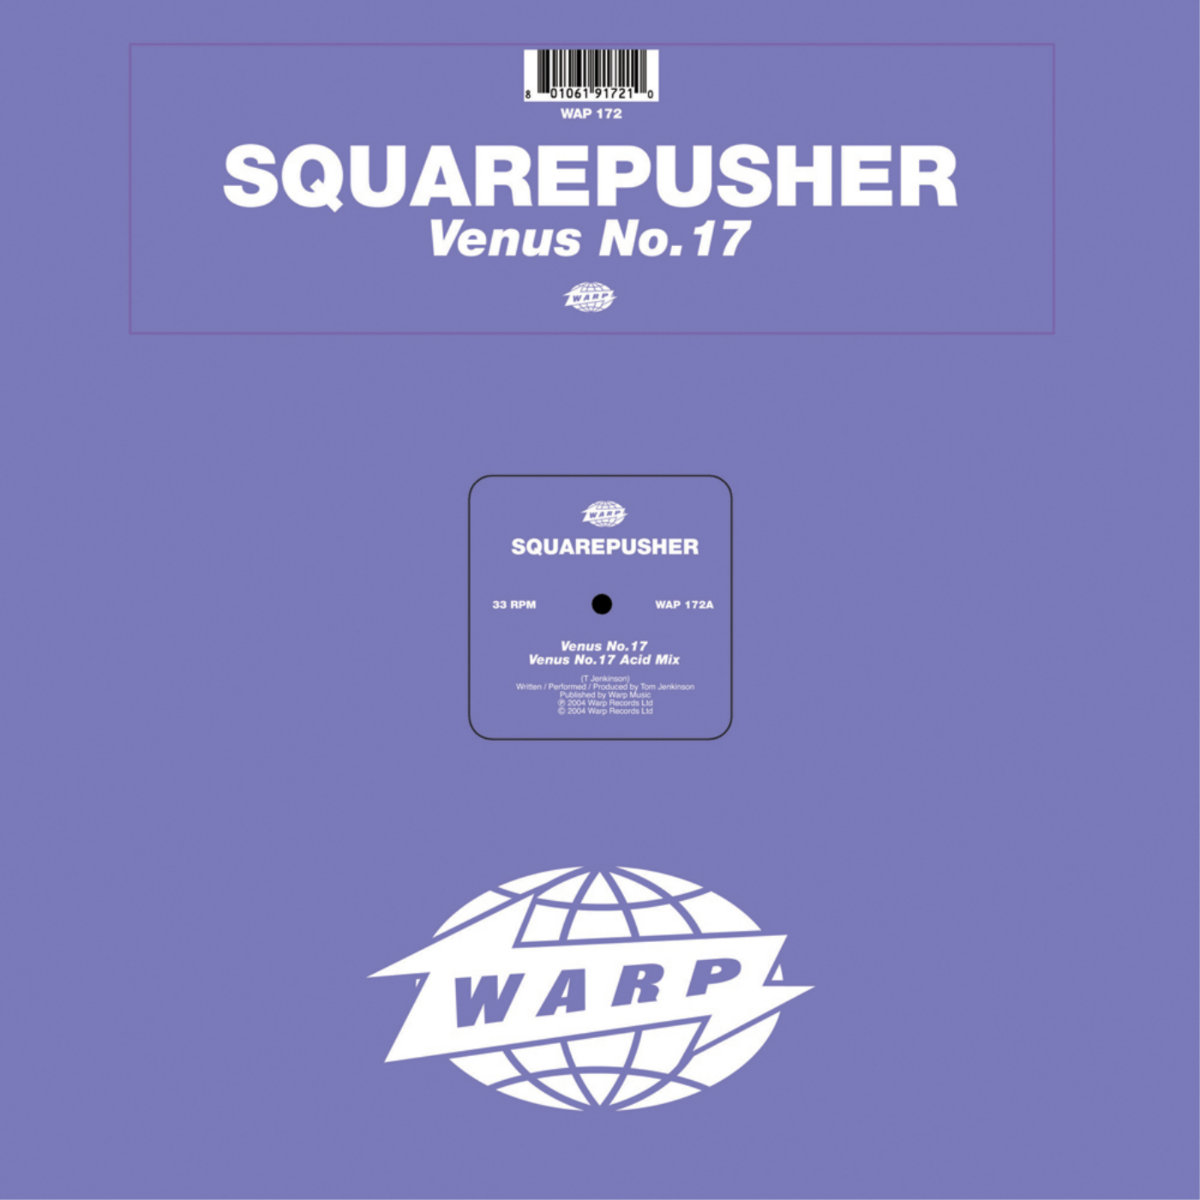 the cover art for the EP 'Venus No.17' by Squarepusher